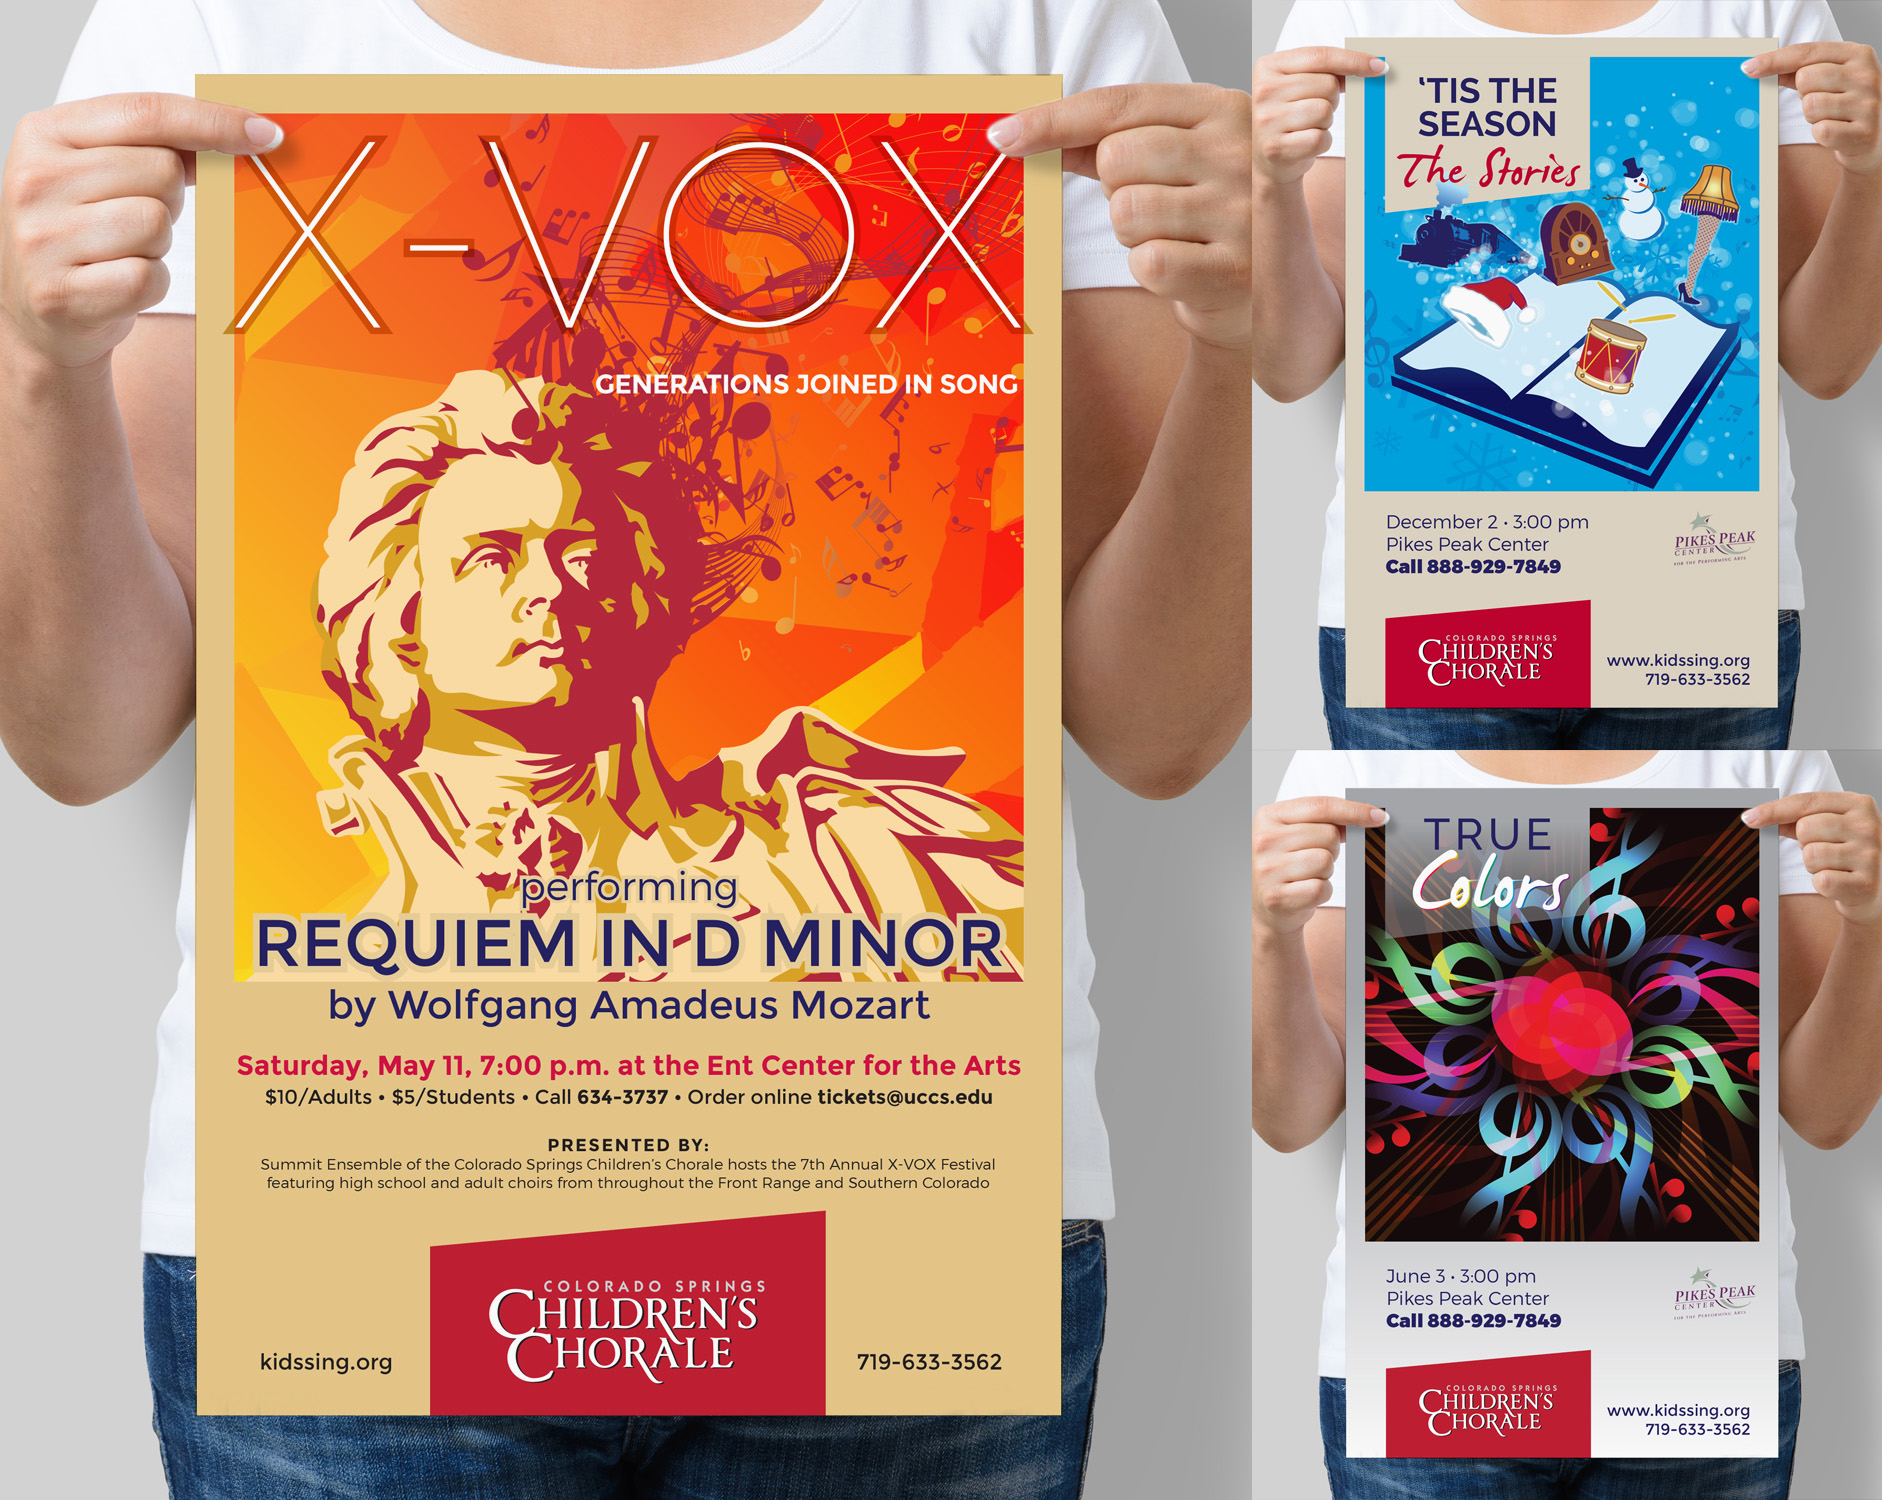 set of three poster designs for Colorado Springs Children's Chorale 2018 season